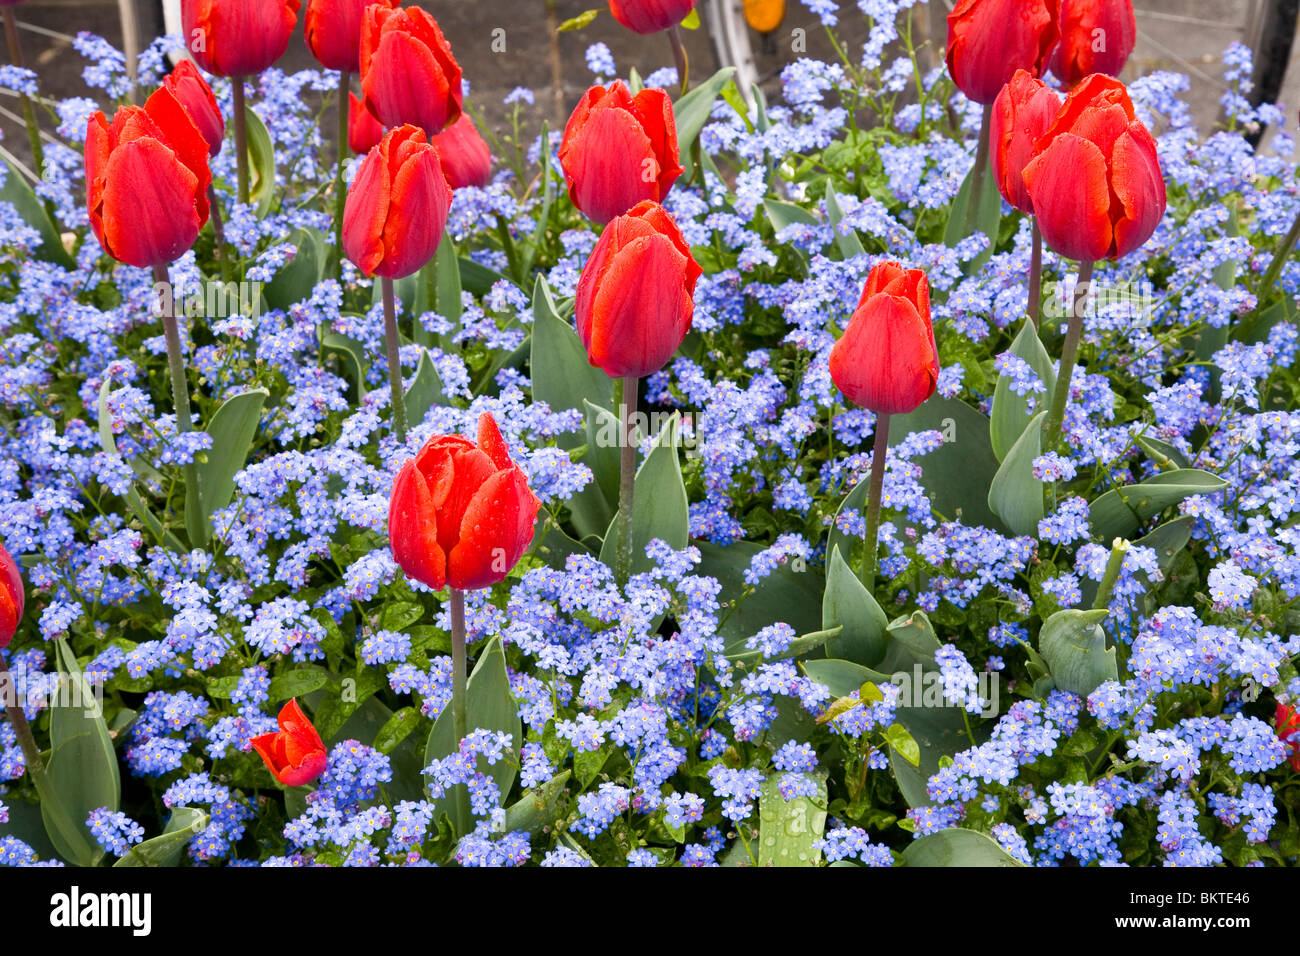 Tulips set amongst forget-me-nots Stock Photo